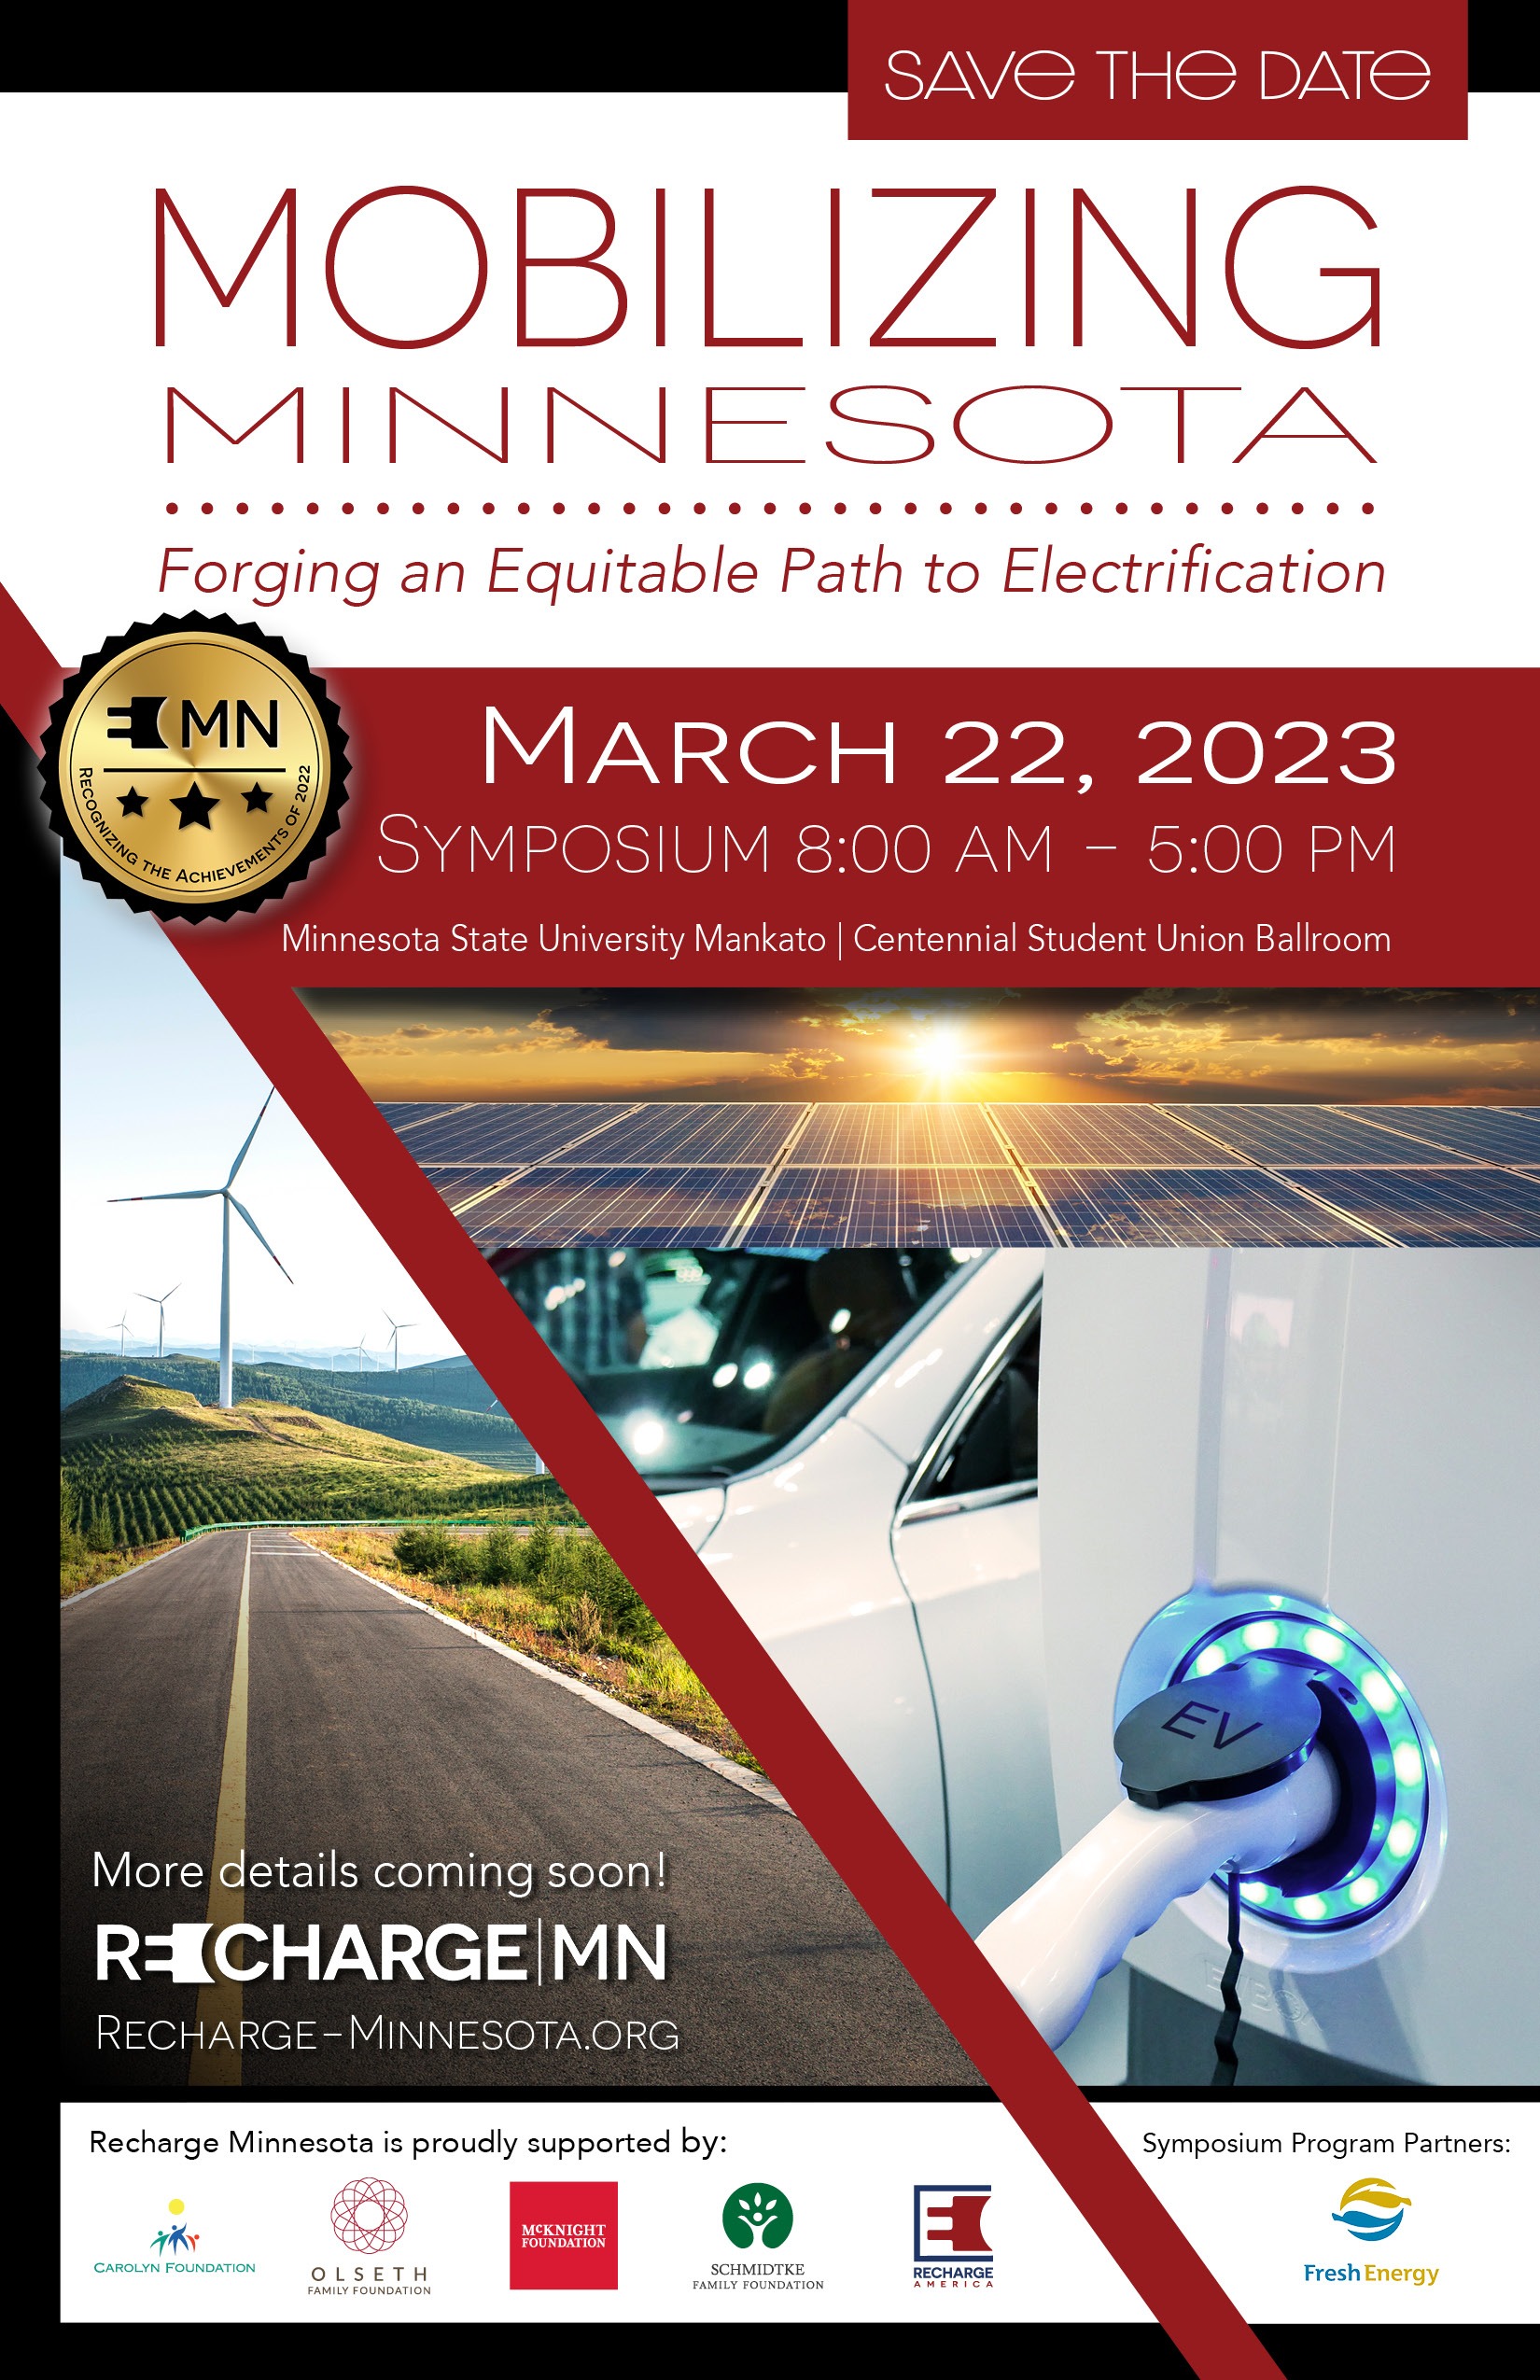 Flyer for the Recharge America Symposium 2023 in Minnesota entitled Mobilizing Minnesota, Forging an Equitable Path to Electrification.